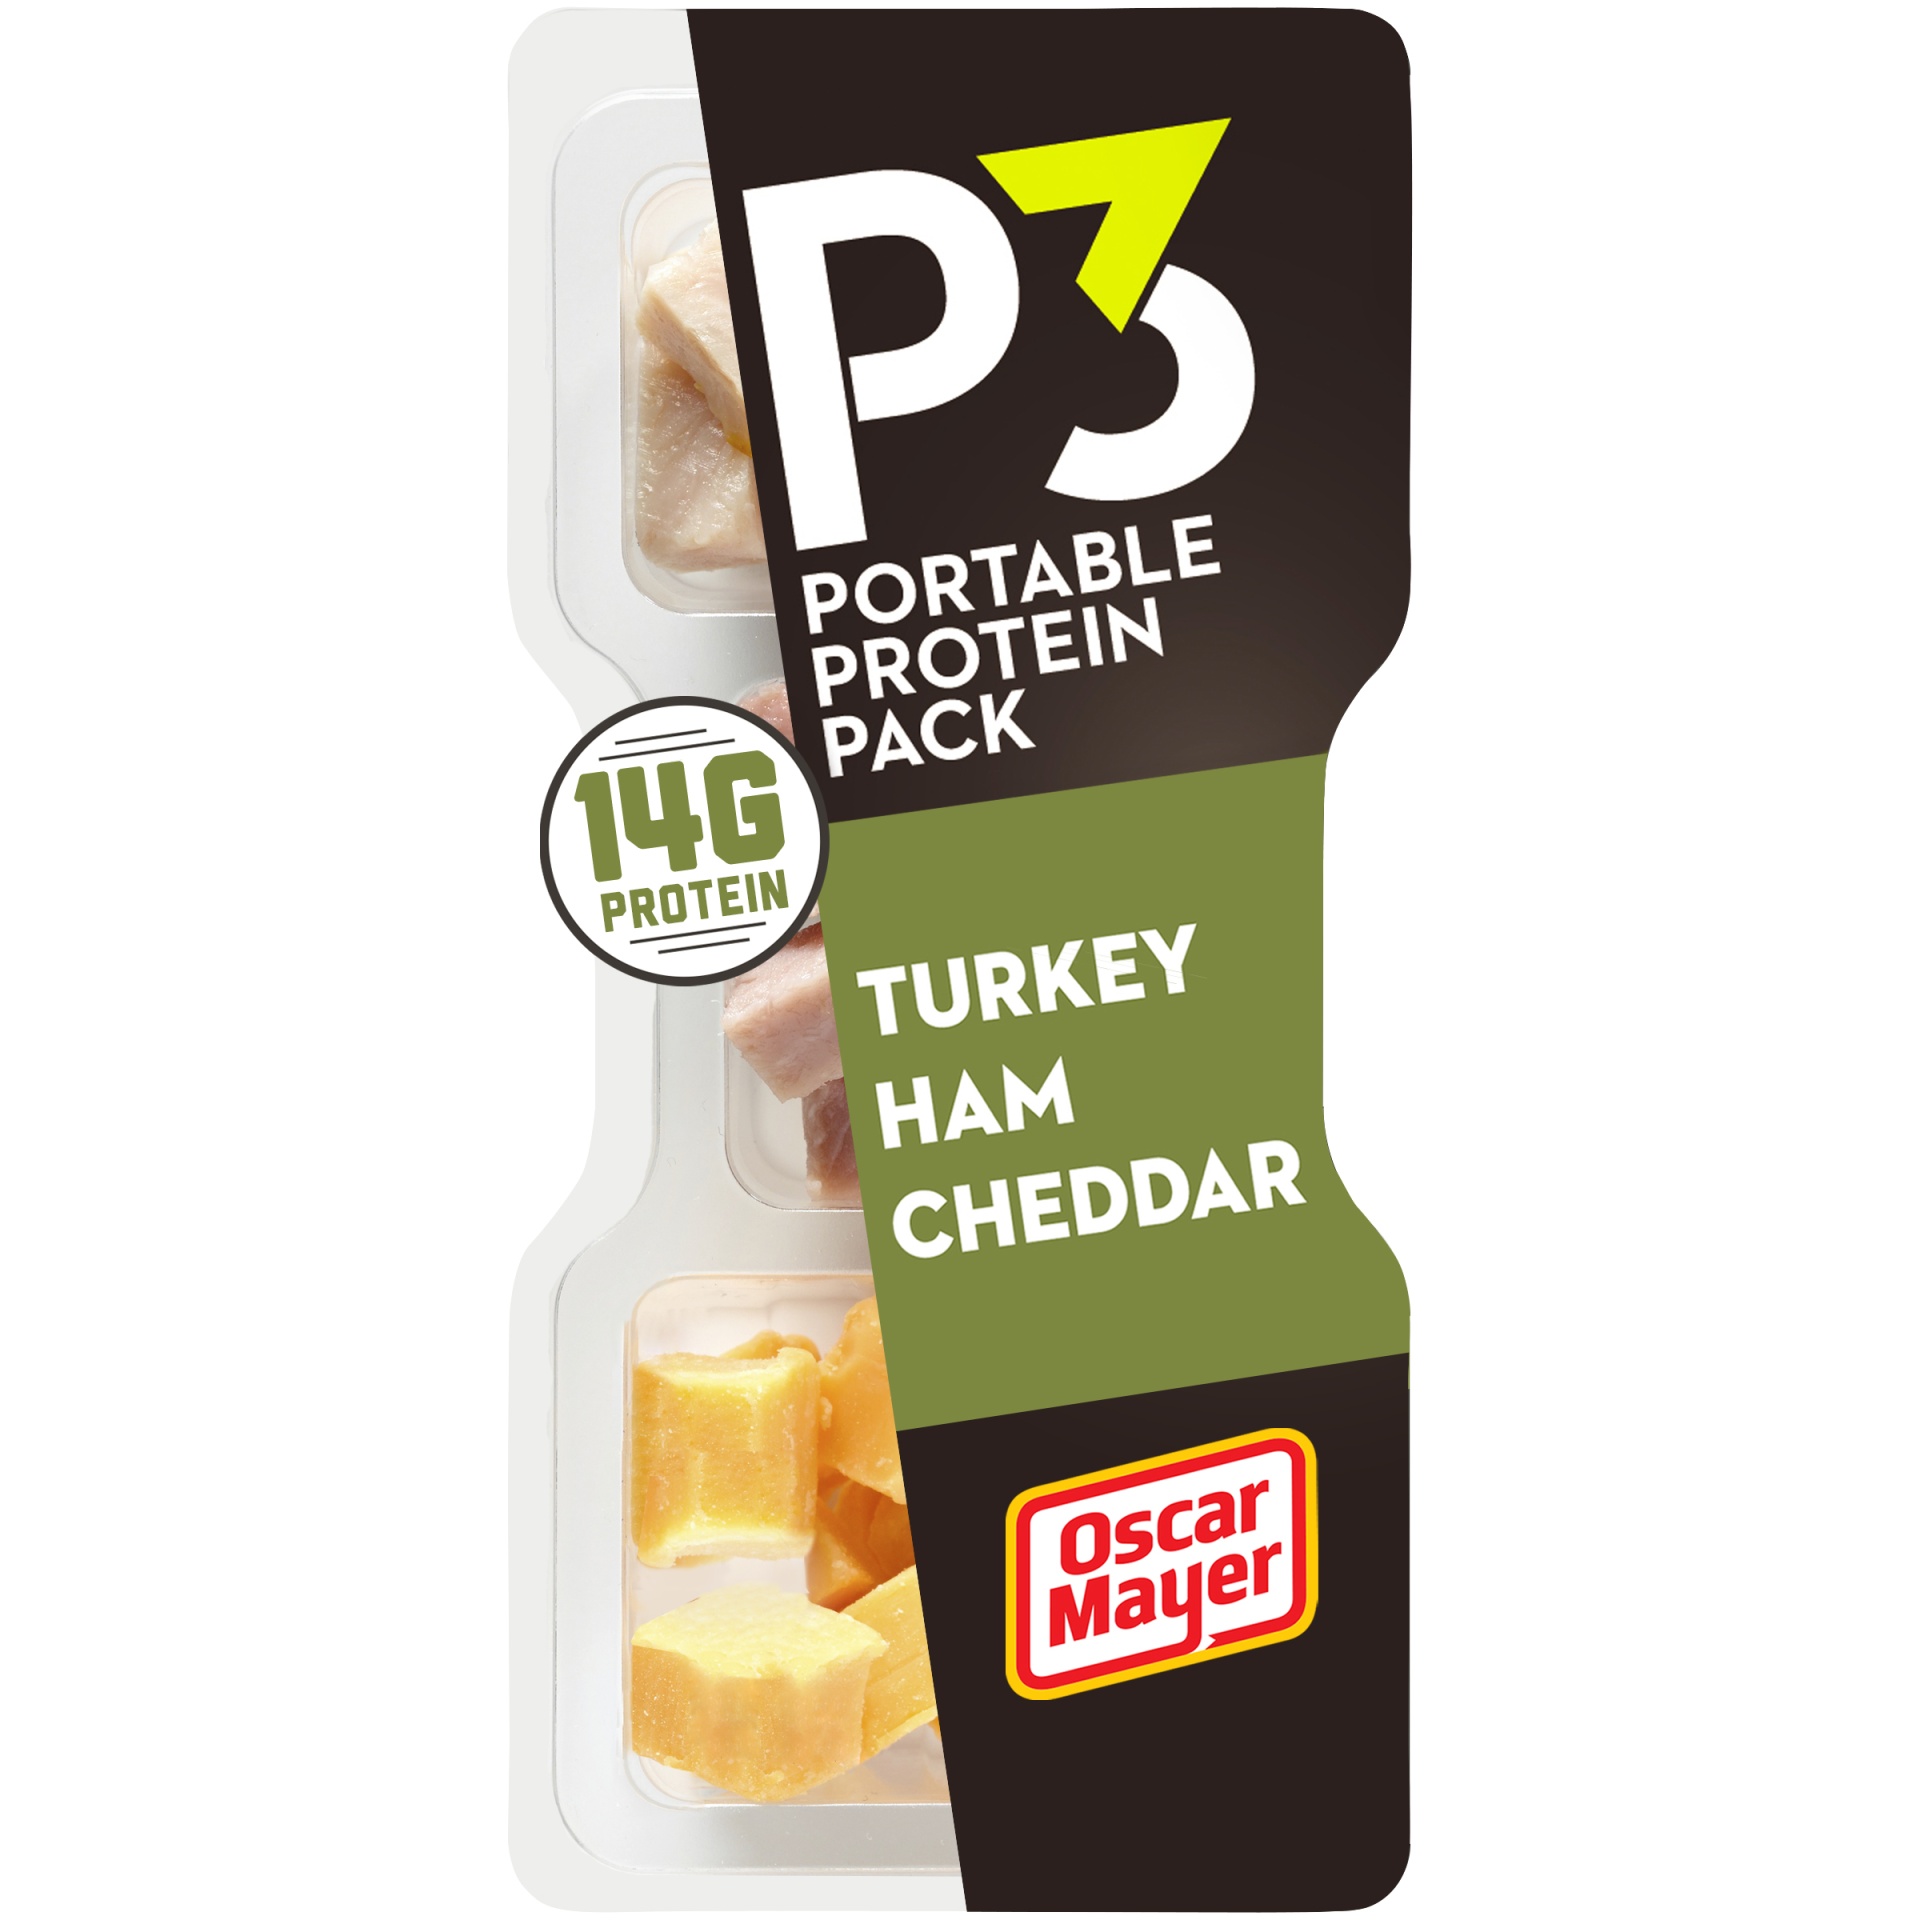 slide 1 of 4, P3 Portable Protein Snack Pack with Turkey, Ham & Cheddar Cheese Tray, 2.3 oz